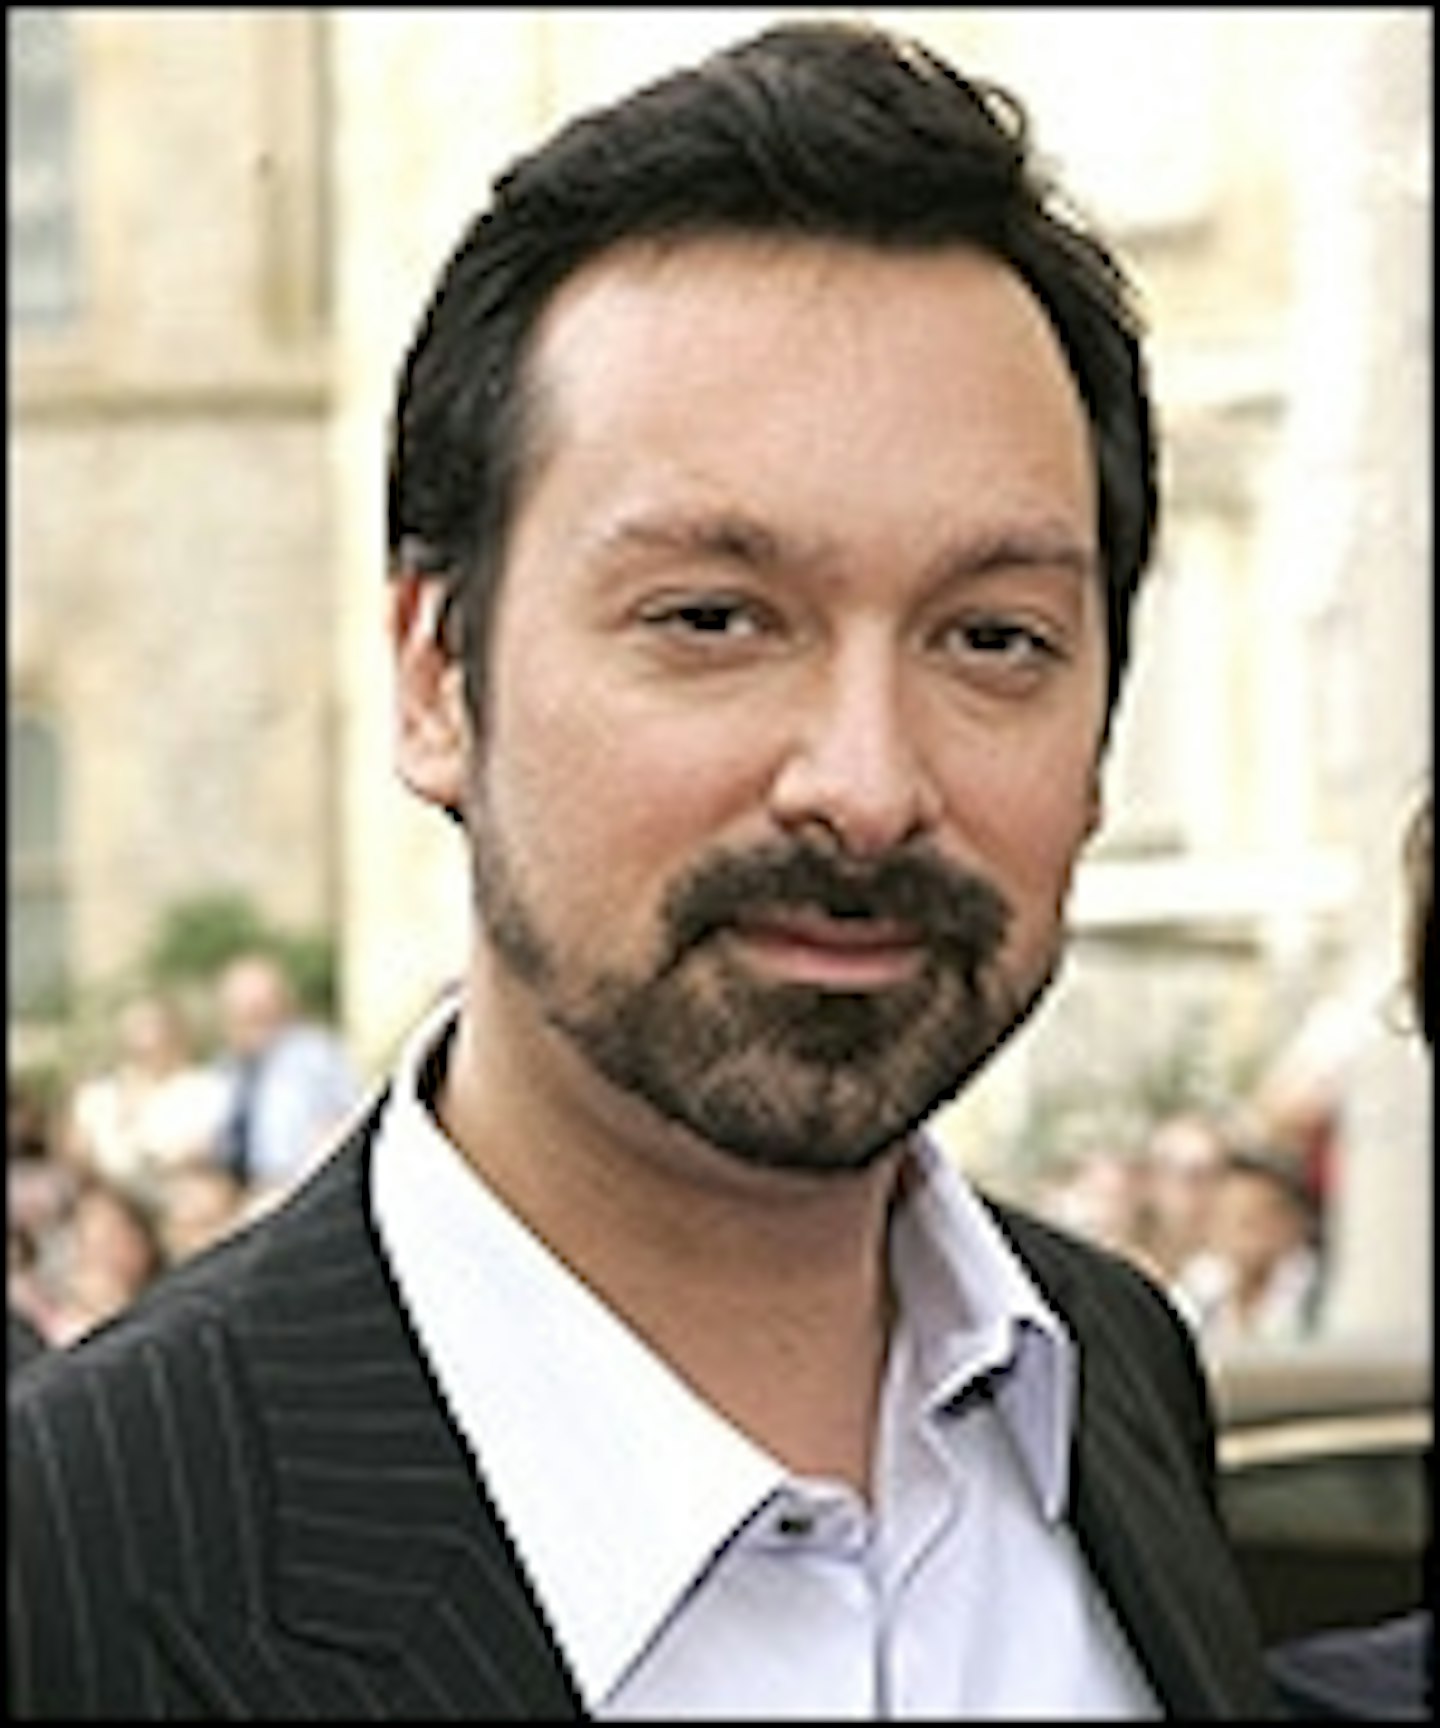 James Mangold Directing The Wolverine